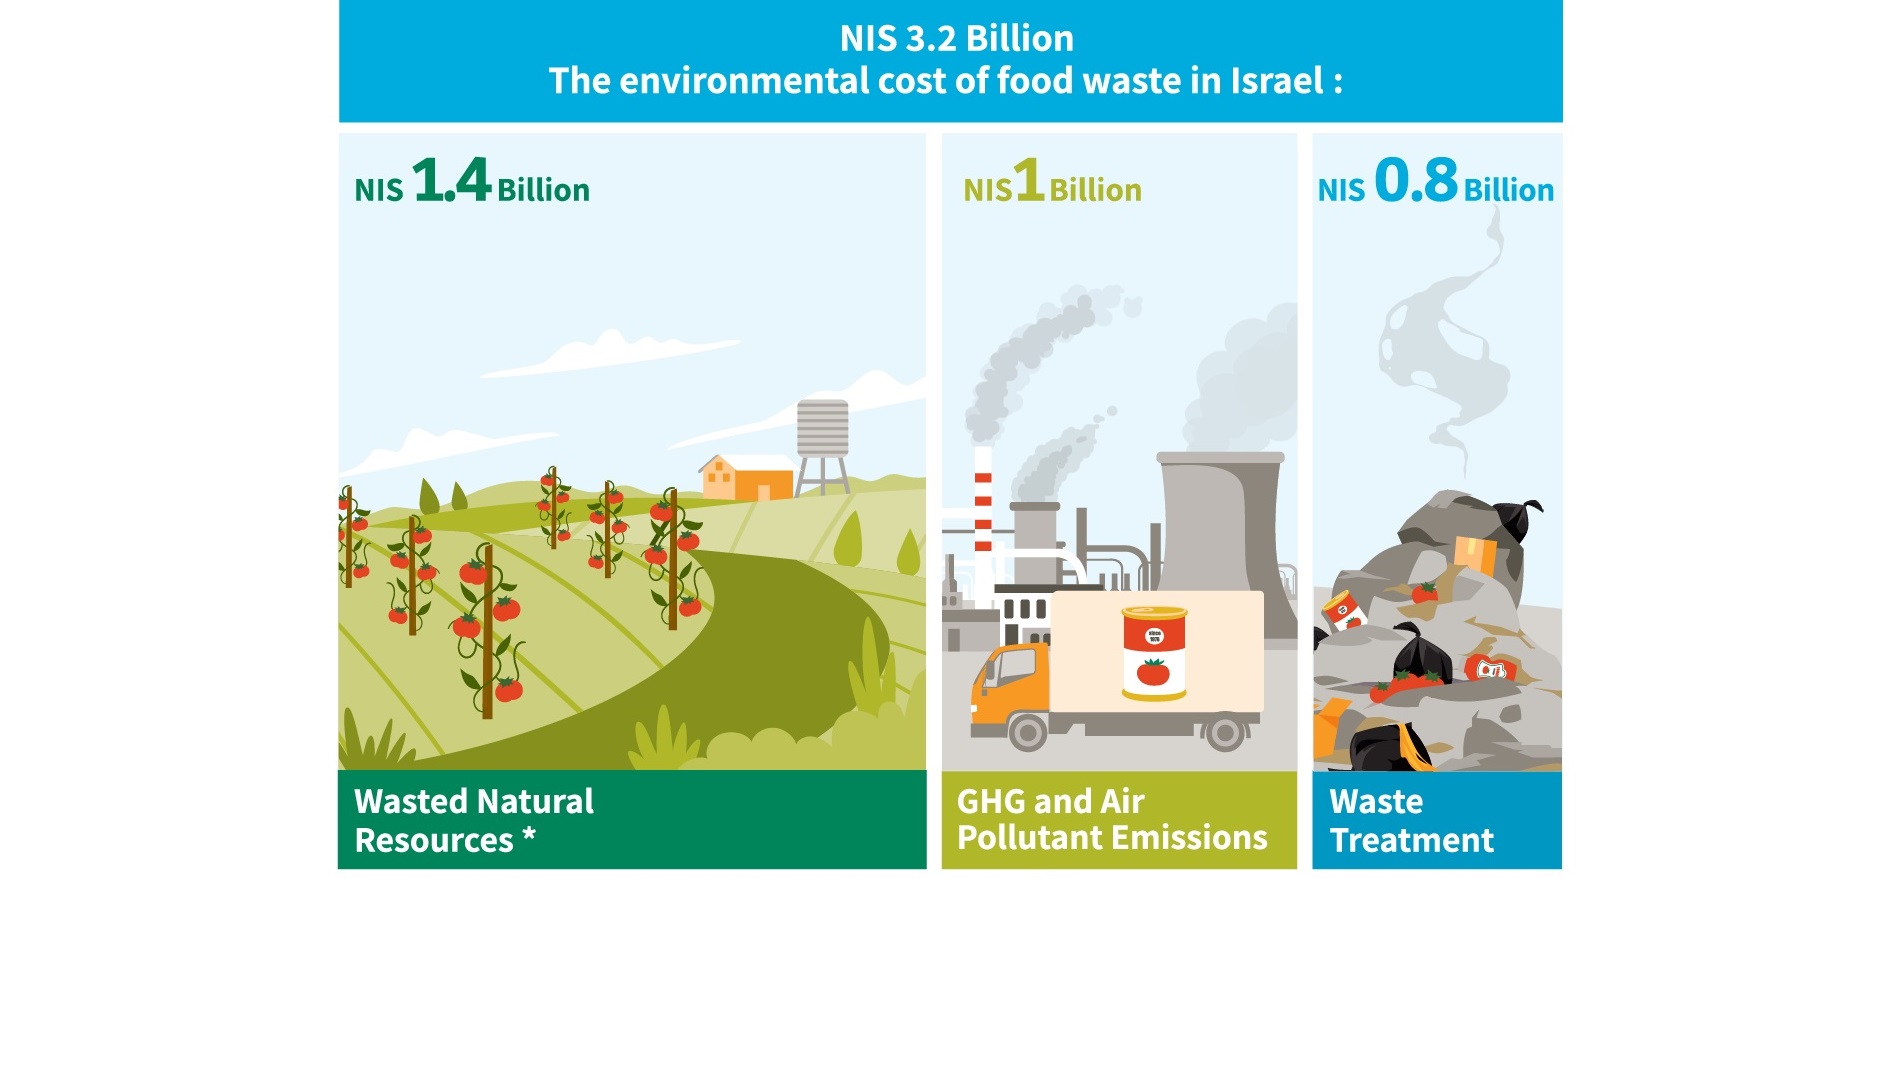 Environmental Damage from Wasted Food in Israel Valued at $945M: report